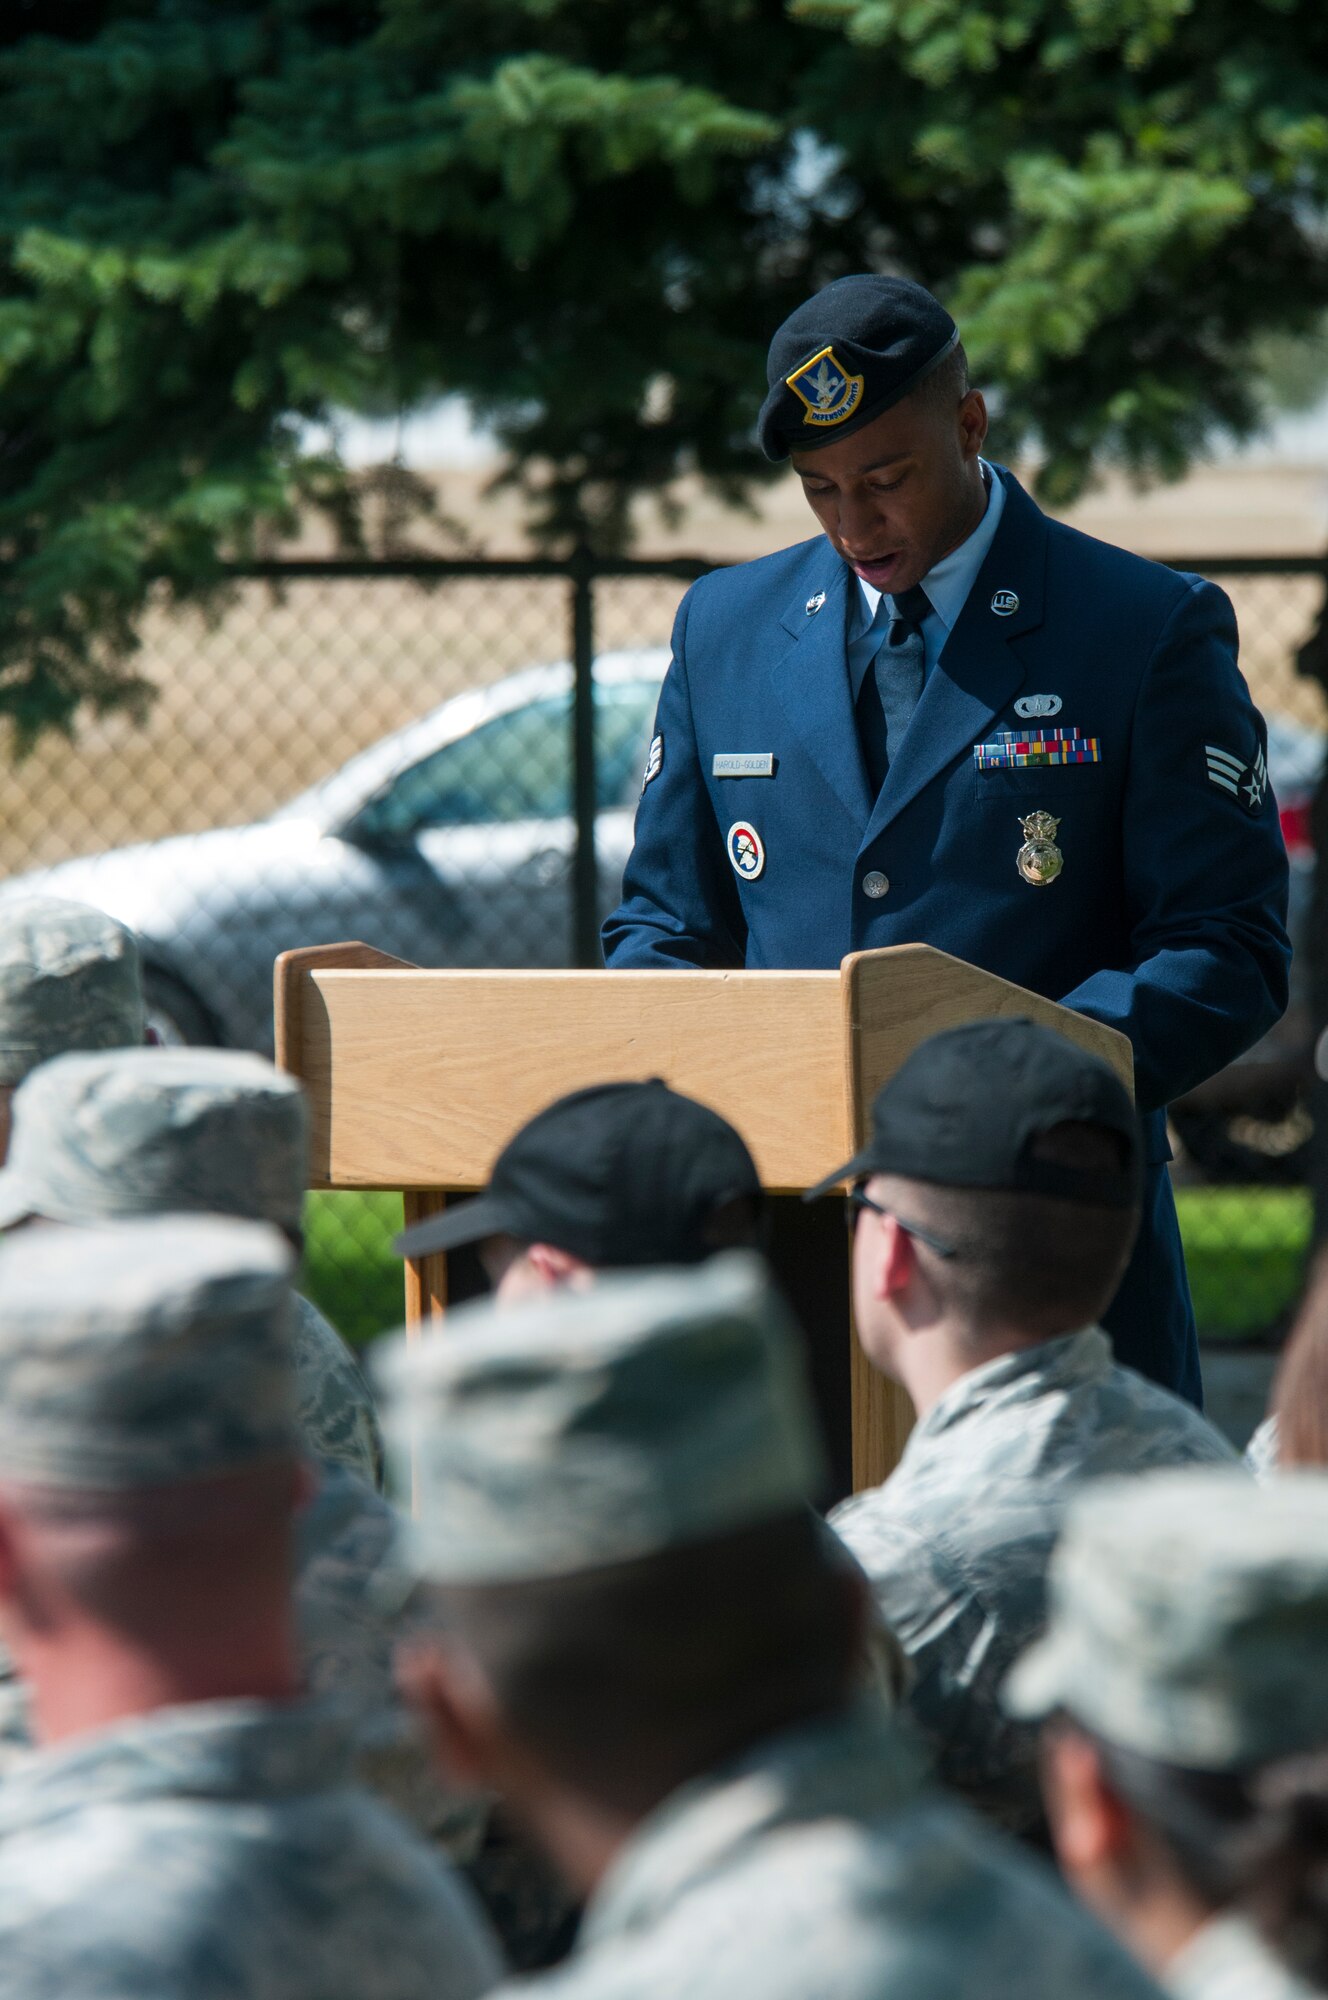 Senior Airman Darren Haroldgolden, 790th Missile Security Forces Squadron response force leader and 90th Missile Wing ceremonial guardsman, addresses the audience attending the 90th MW Honor Guard graduation ceremony Sept. 11, 2015, in the F.E. Warren Air Force Base, Wyo., cemetery. spoke of the need for professionalism like that shown by ceremonial guardsmen in light of the reminder on Sept. 11 of the grievous attacks against the U.S. in 2001. (U.S. Air Force photo by Senior Airman Jason Wiese)